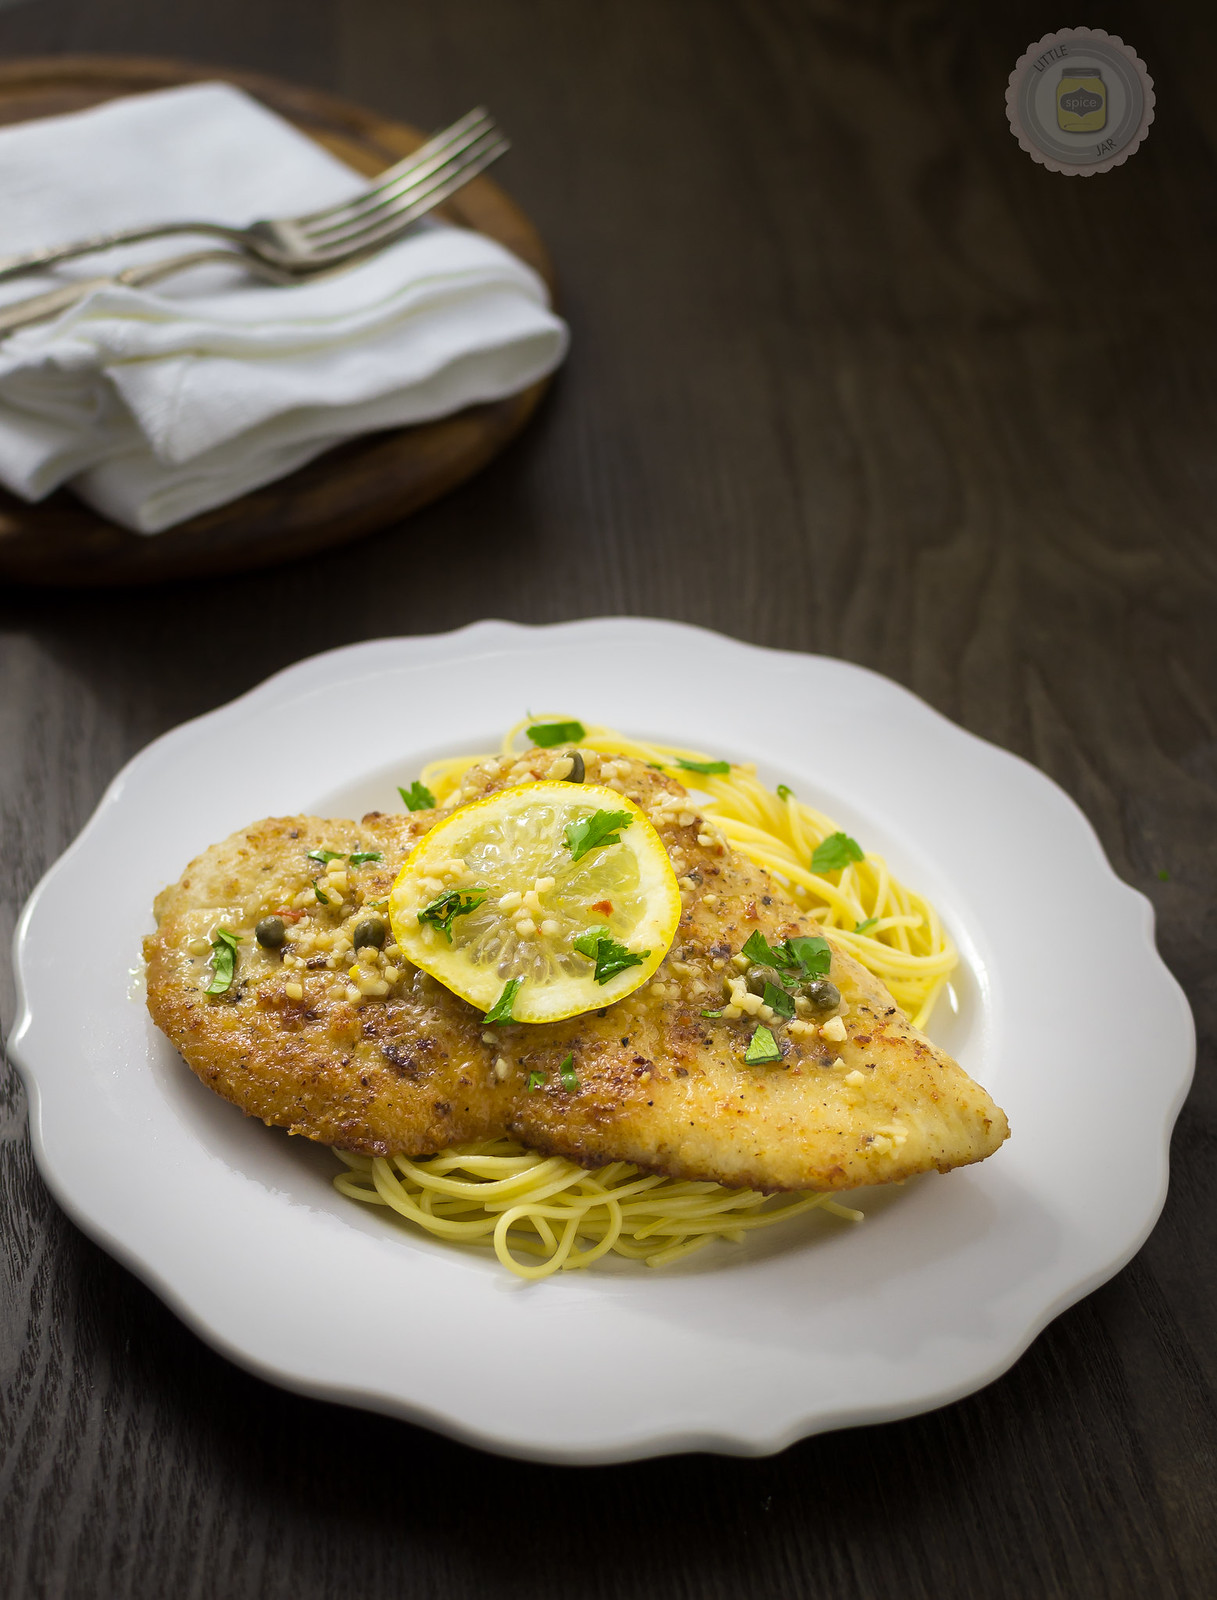 plate with prepared spaghetti topped with chicken breast with lemon slice and parsley